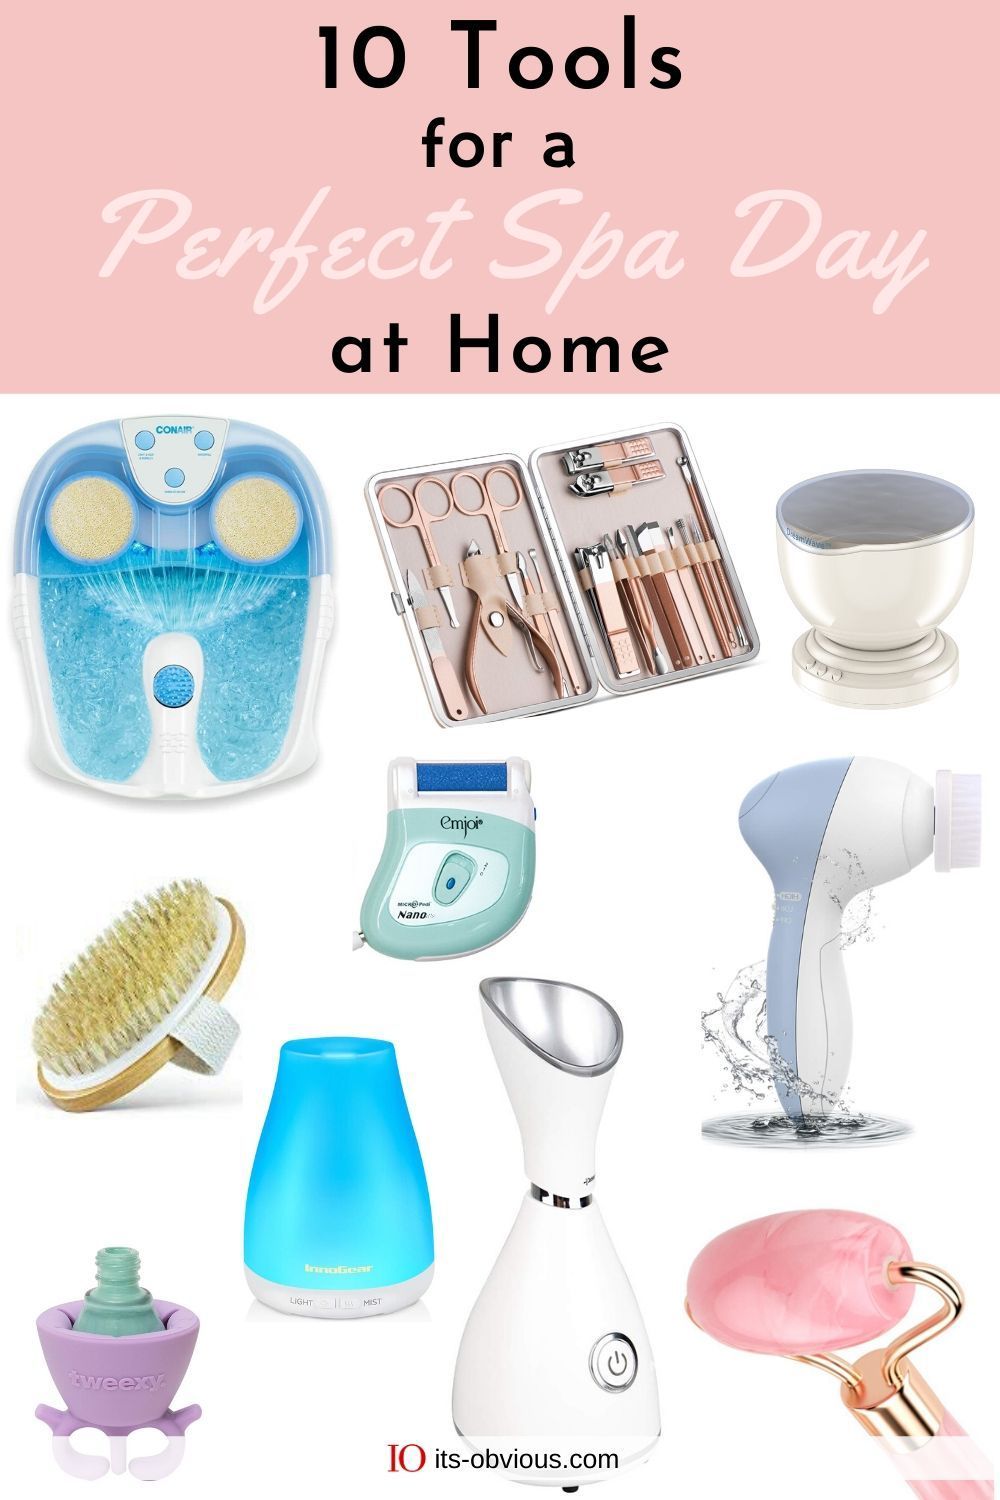 10 tools for a Perfect Spa Day At Home Treatments, How To Have The Perfect At-Home Spa Day - 10 tools for a Perfect Spa Day At Home Treatments, How To Have The Perfect At-Home Spa Day -   16 beauty Skin spa ideas